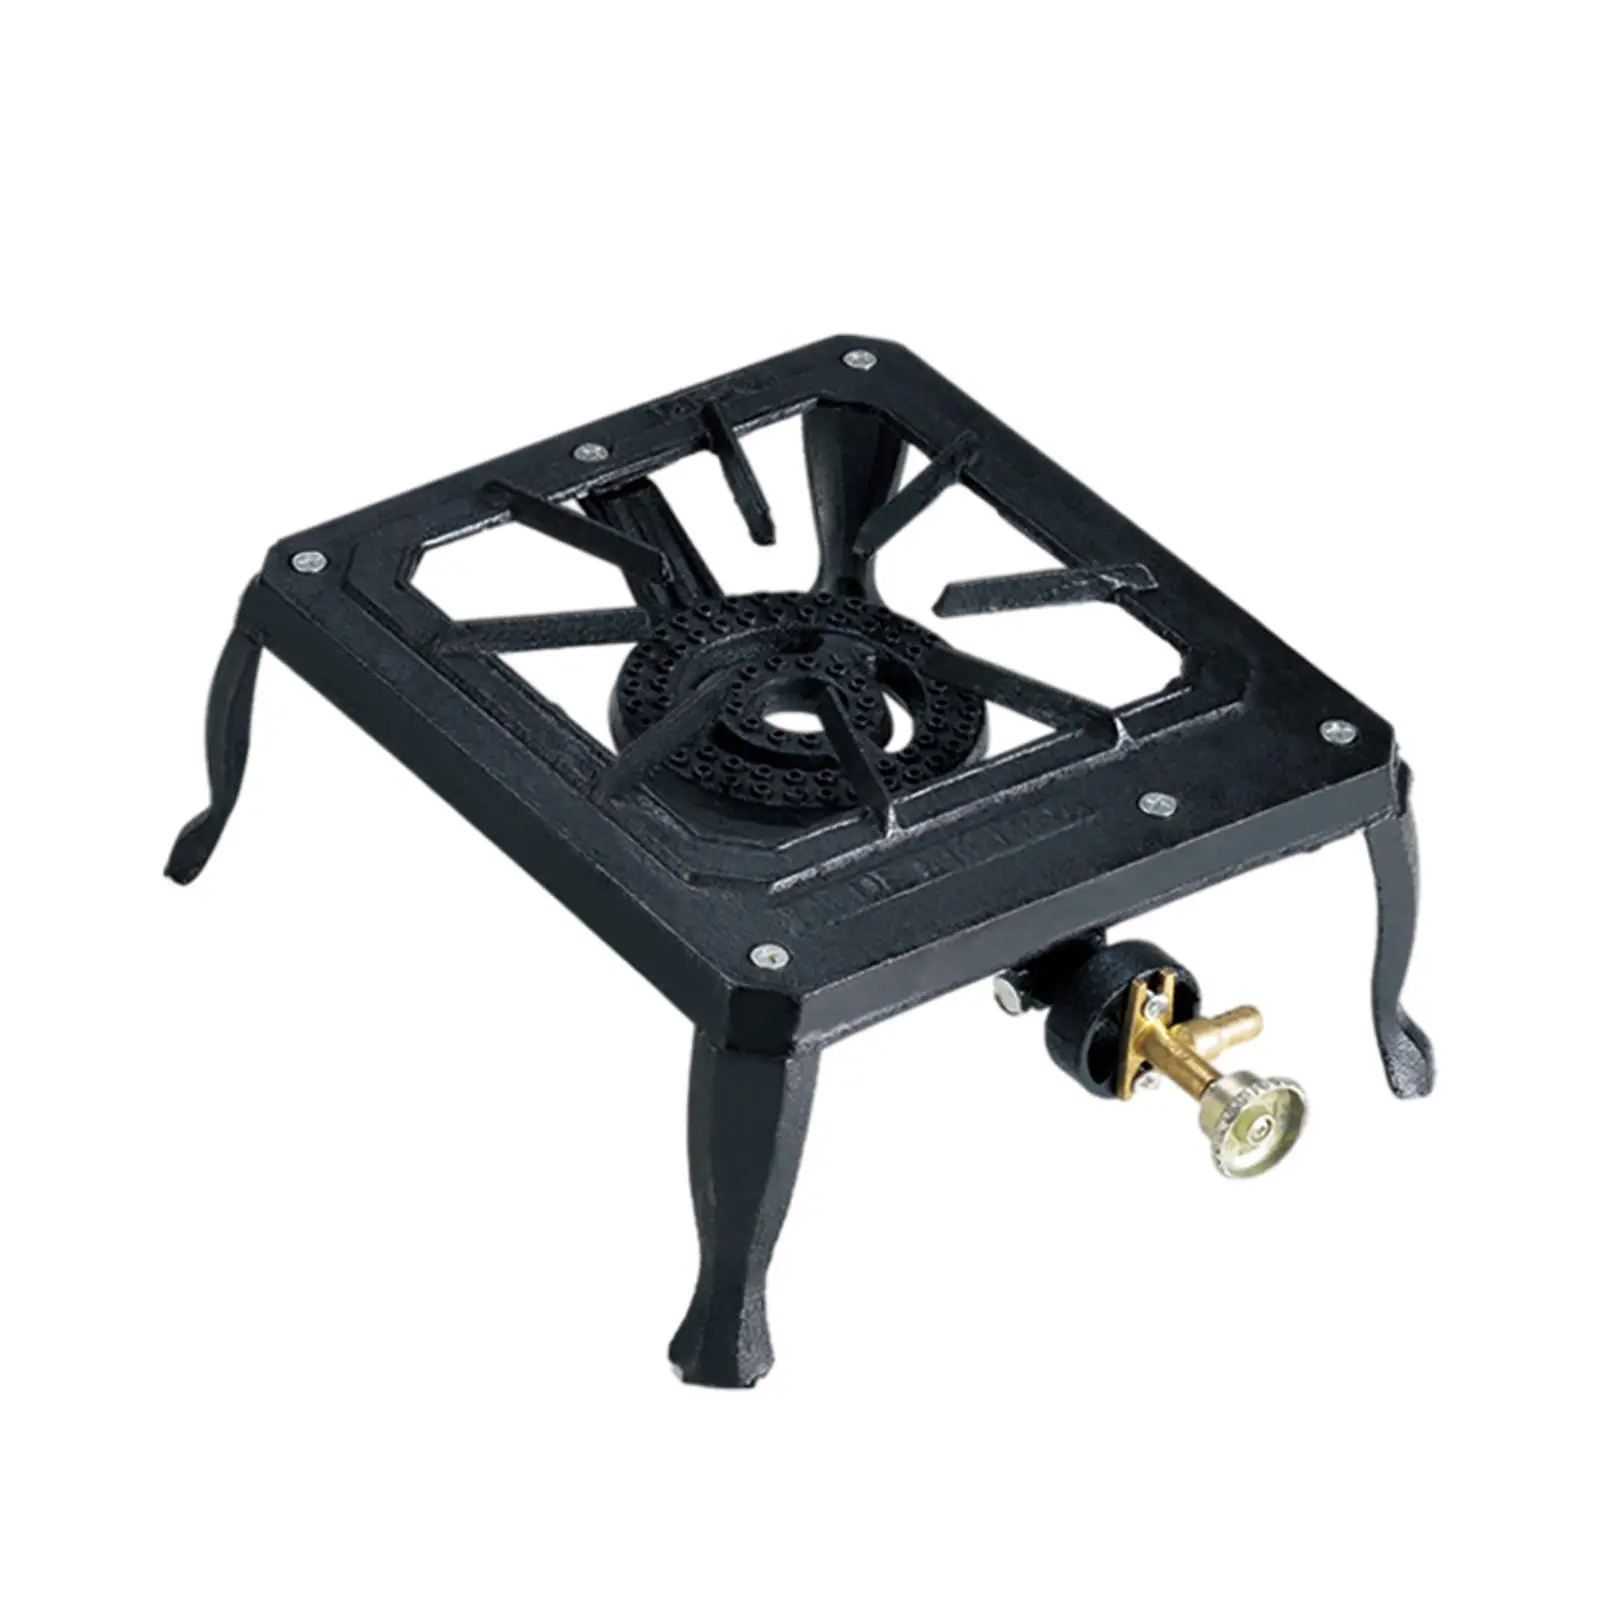 Gas Stove Single Burner Square Propane Stove Boiling Grill Cooker Burner for Home Outdoor